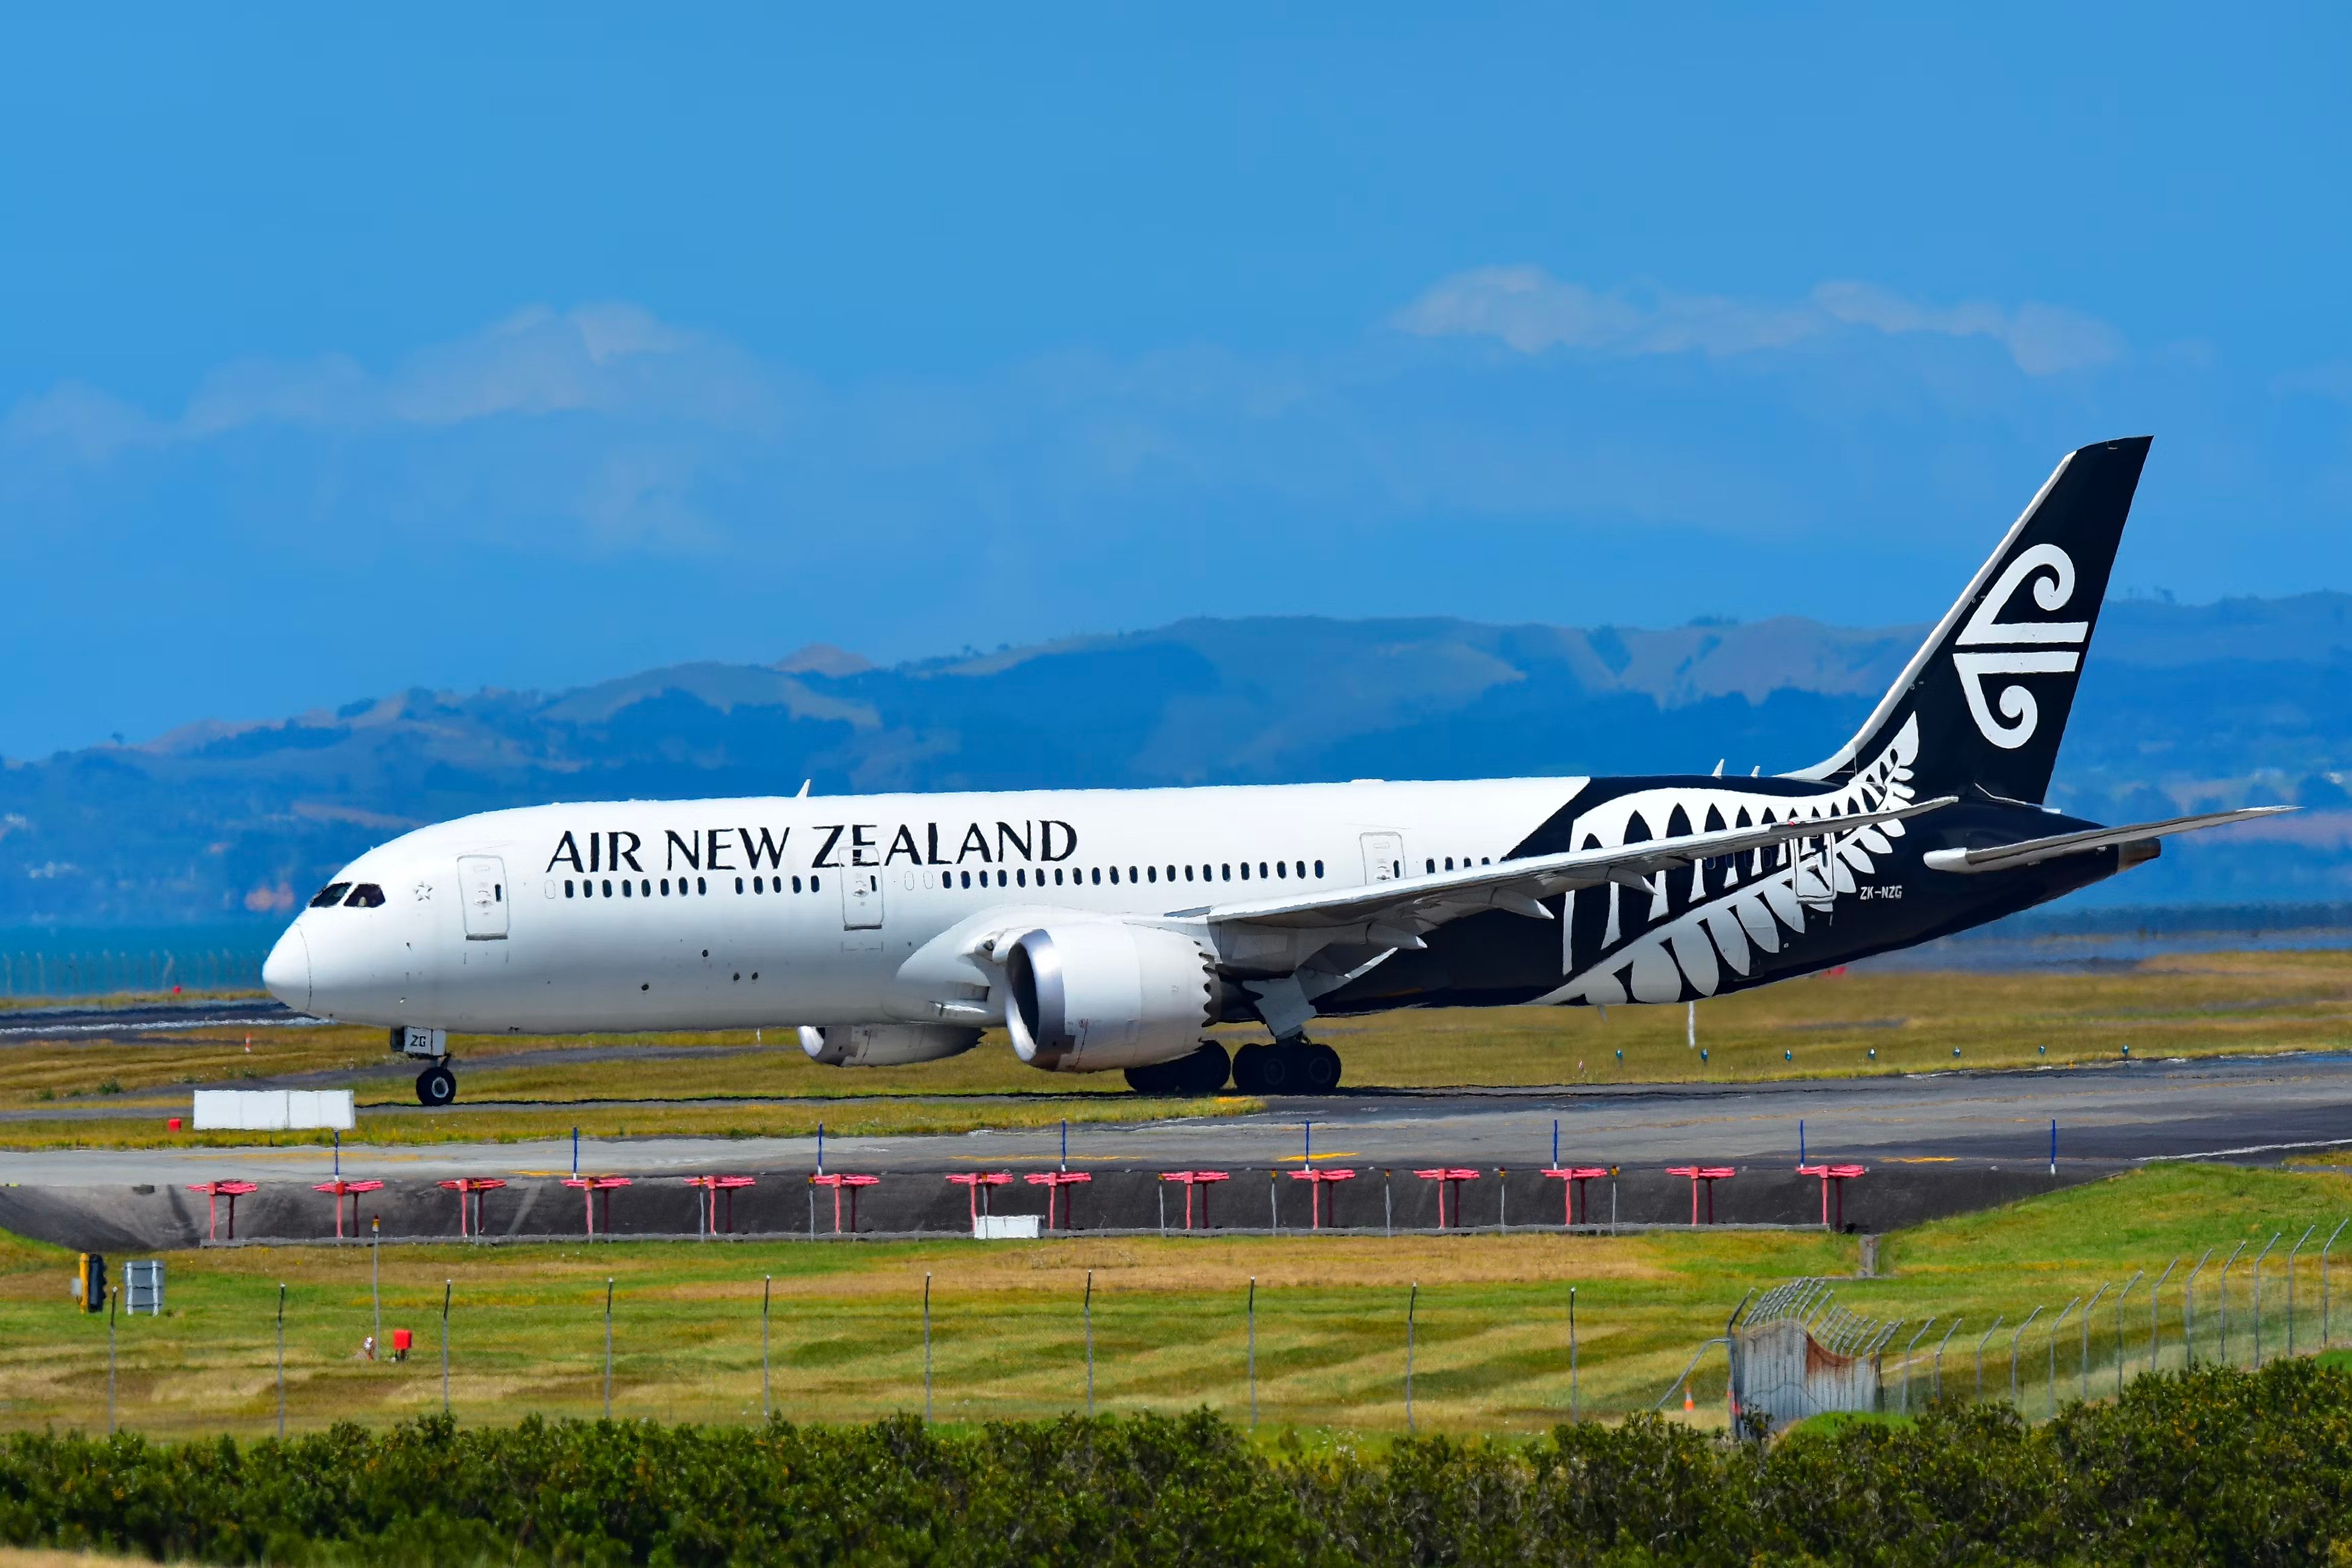 An Air New Zealand Boeing 787-9 Dreamliner on the apron at Auckland Airport.